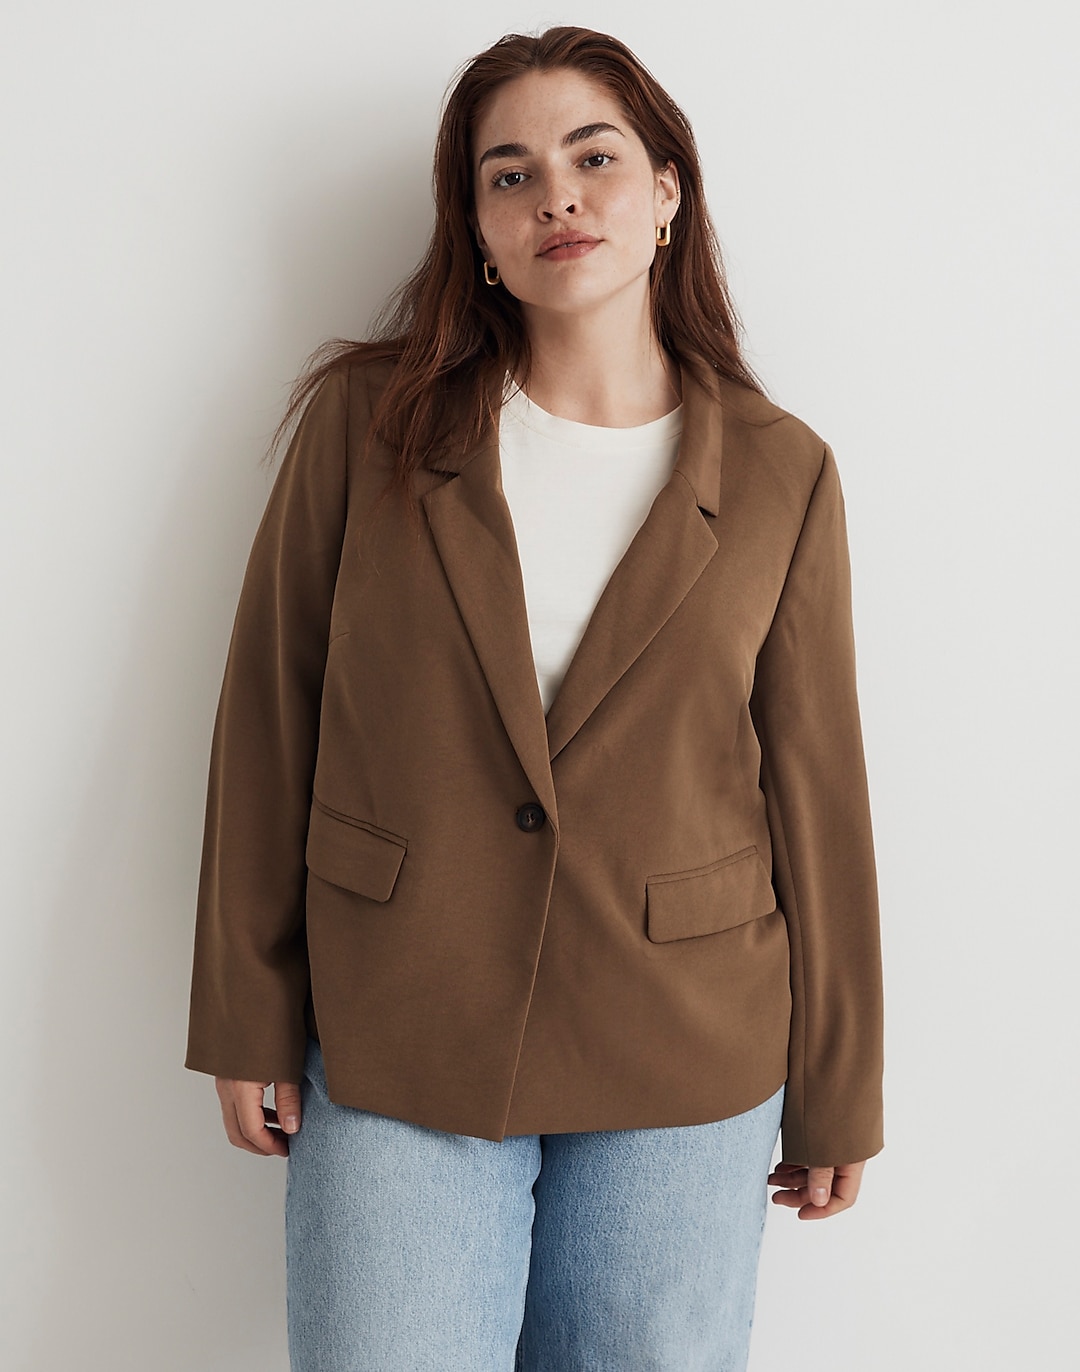 The Plus Dorset Crop Blazer in Easygoing Crepe | Madewell